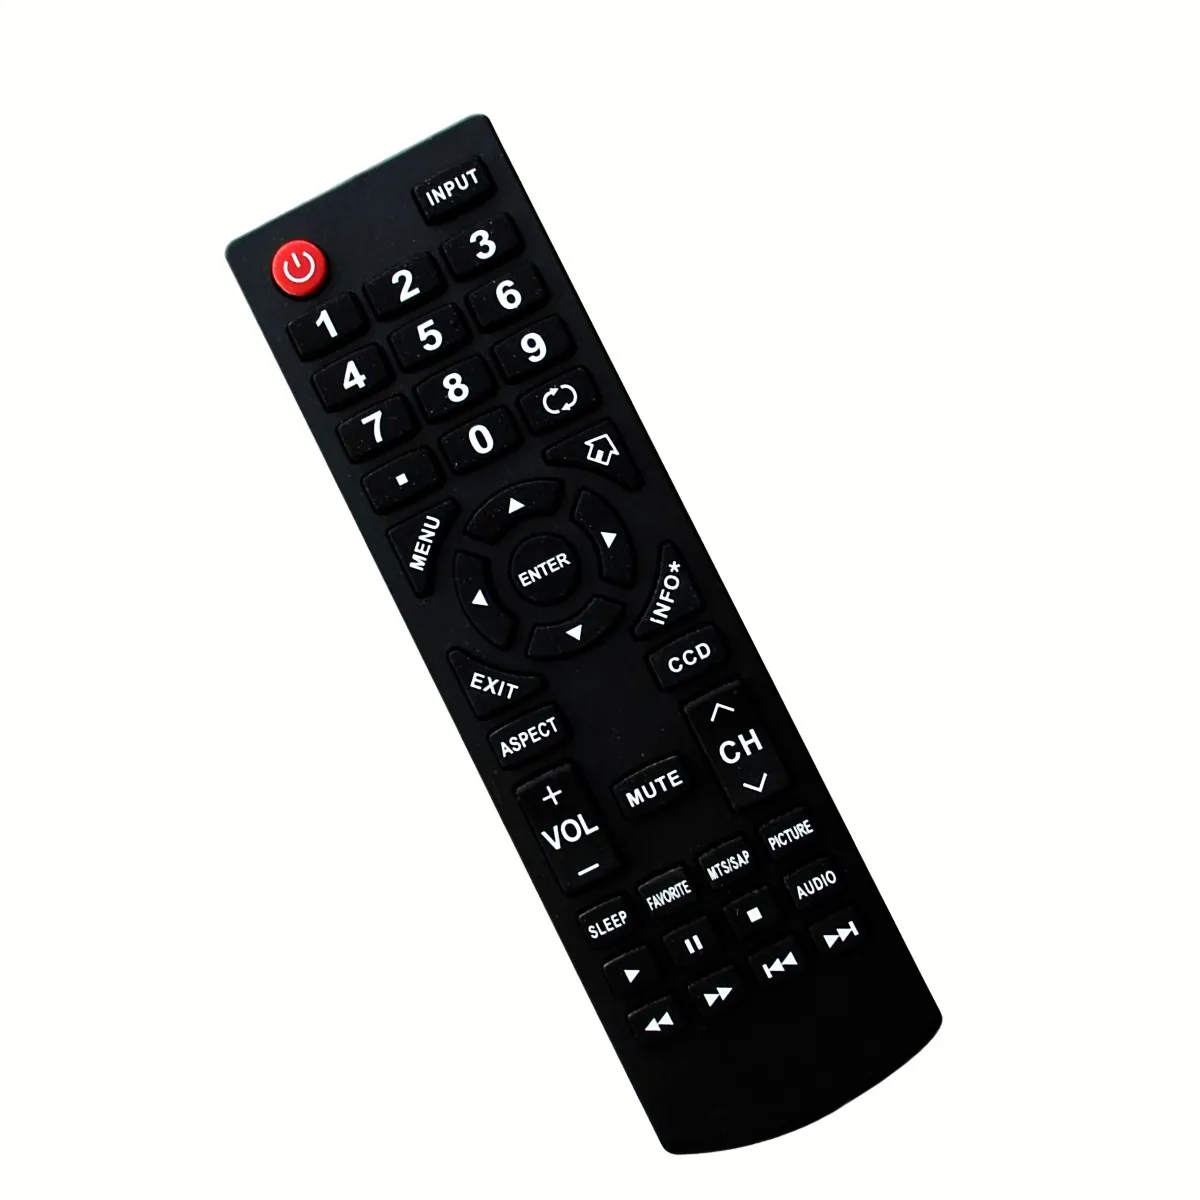 

New Remote Control for Dynex DX-PDP42-09 DX-L42-10A DX-L40-10A DX-L37-10A DX-L22-10A DX-L24-10A CD LED HDTV